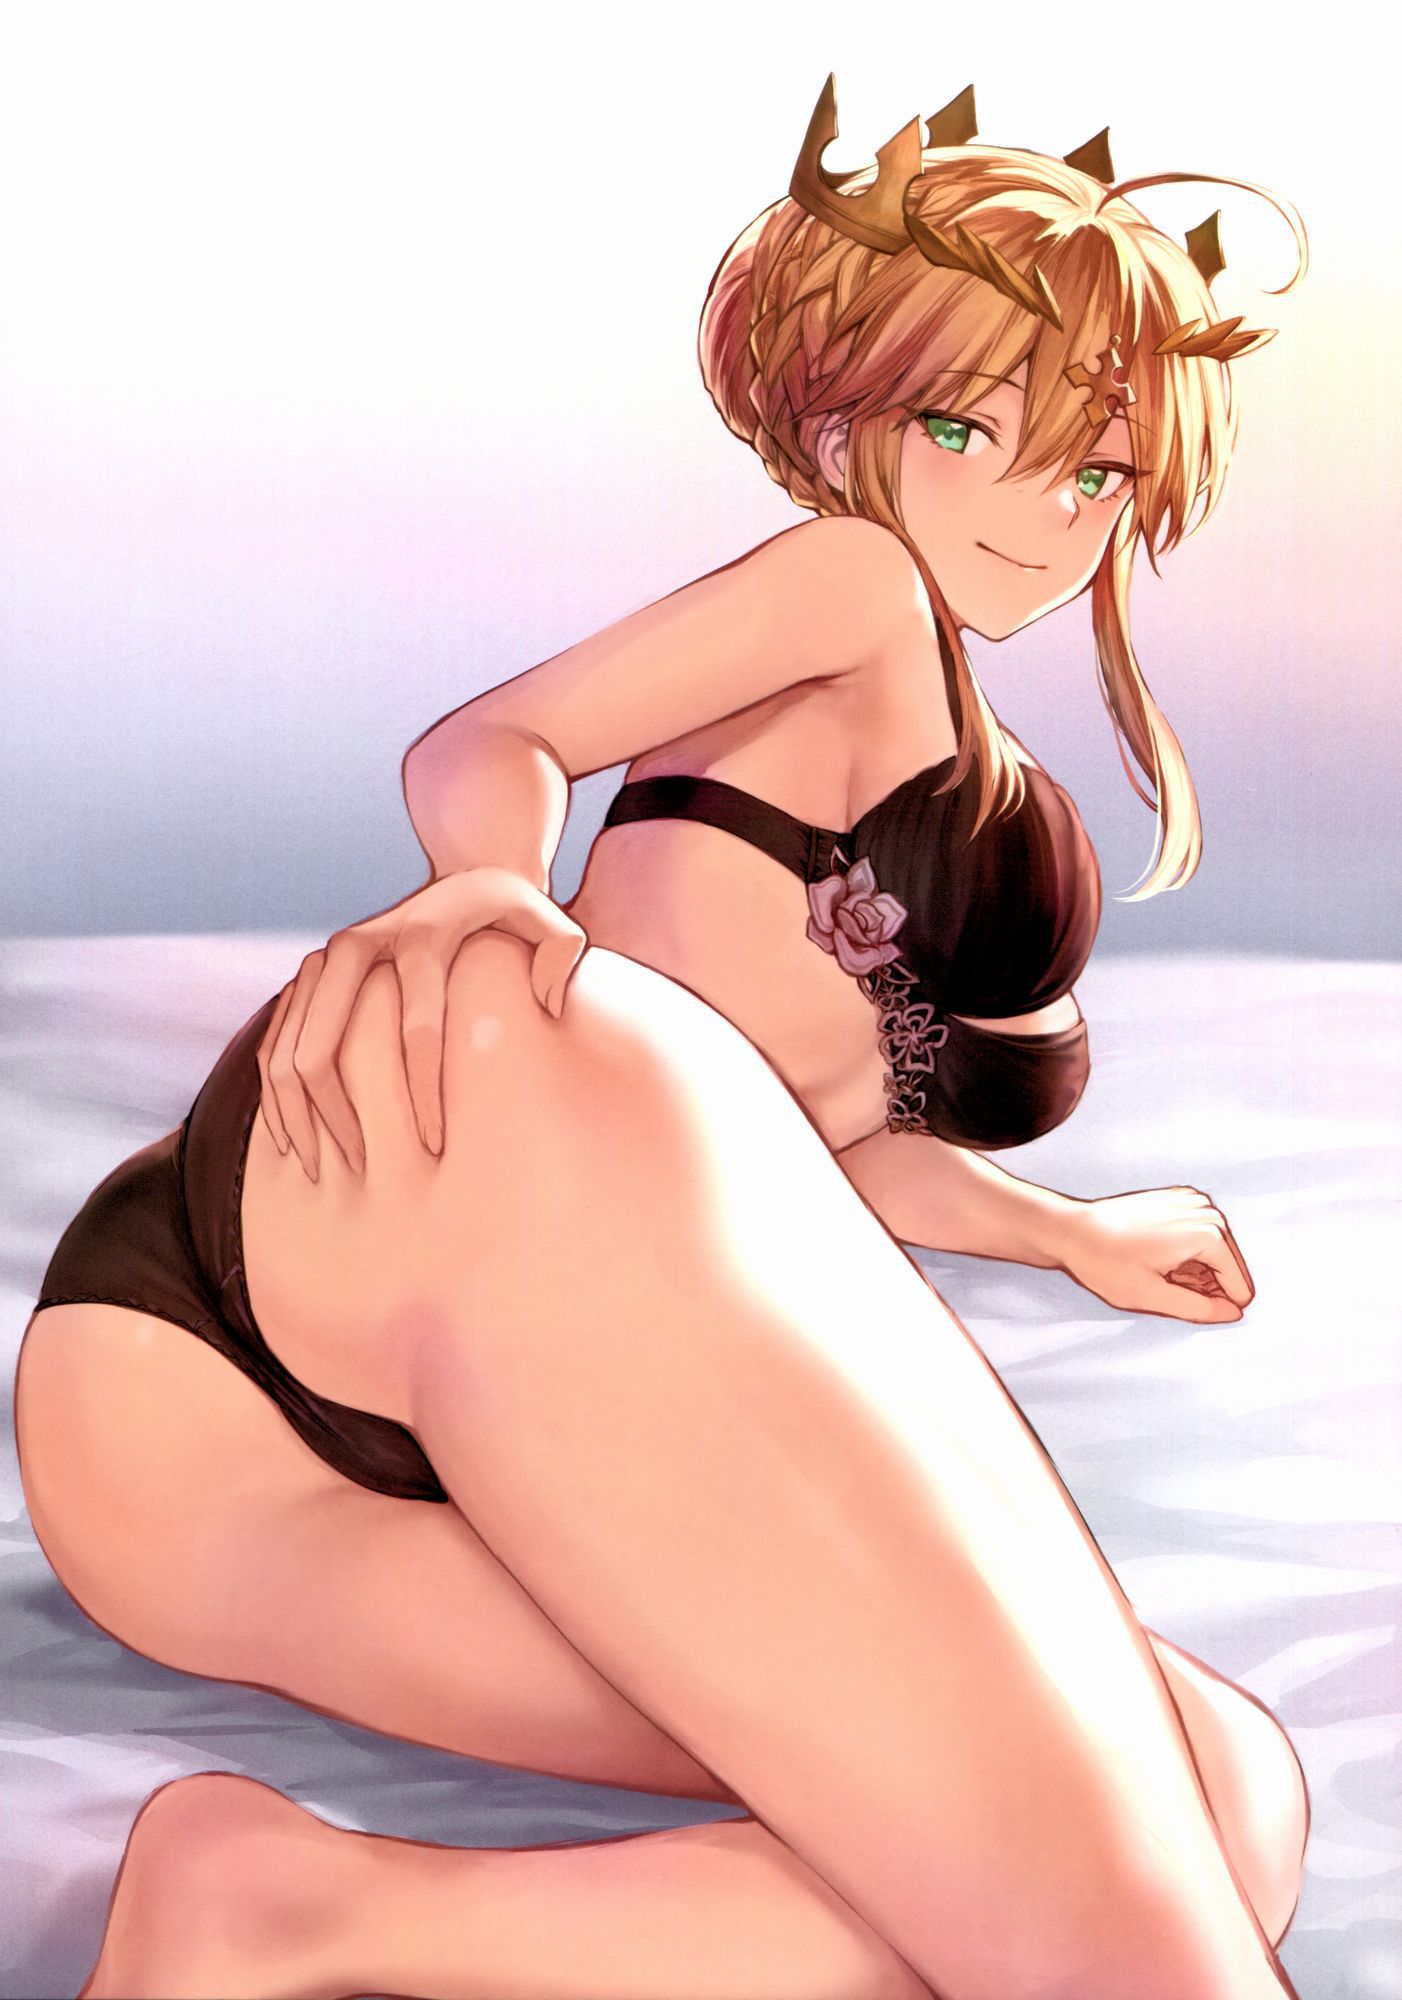 Secondary erotic image of a girl wearing black underwear that looks sexier than [secondary] that 20 [black underwear] 11